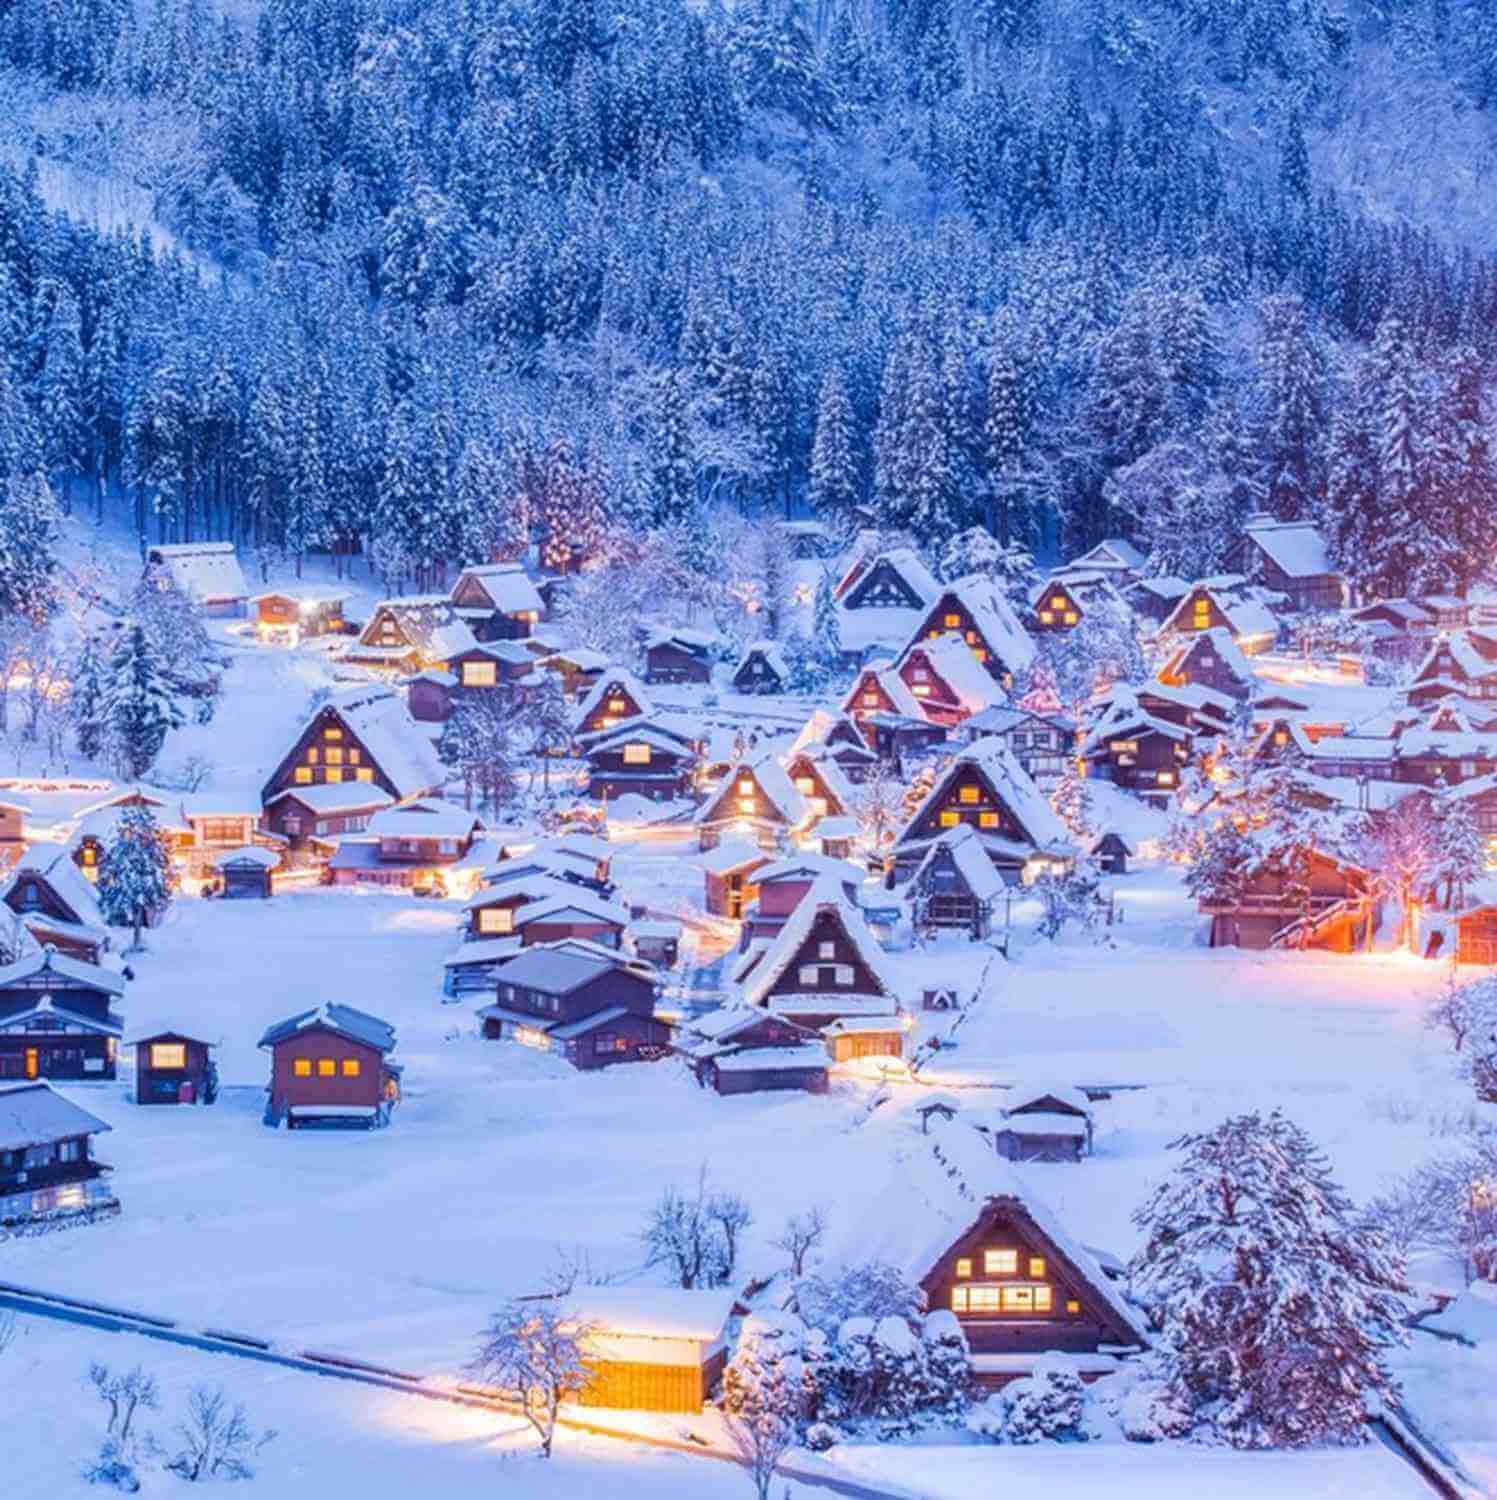 Photos: Snow-covered villages in Japan